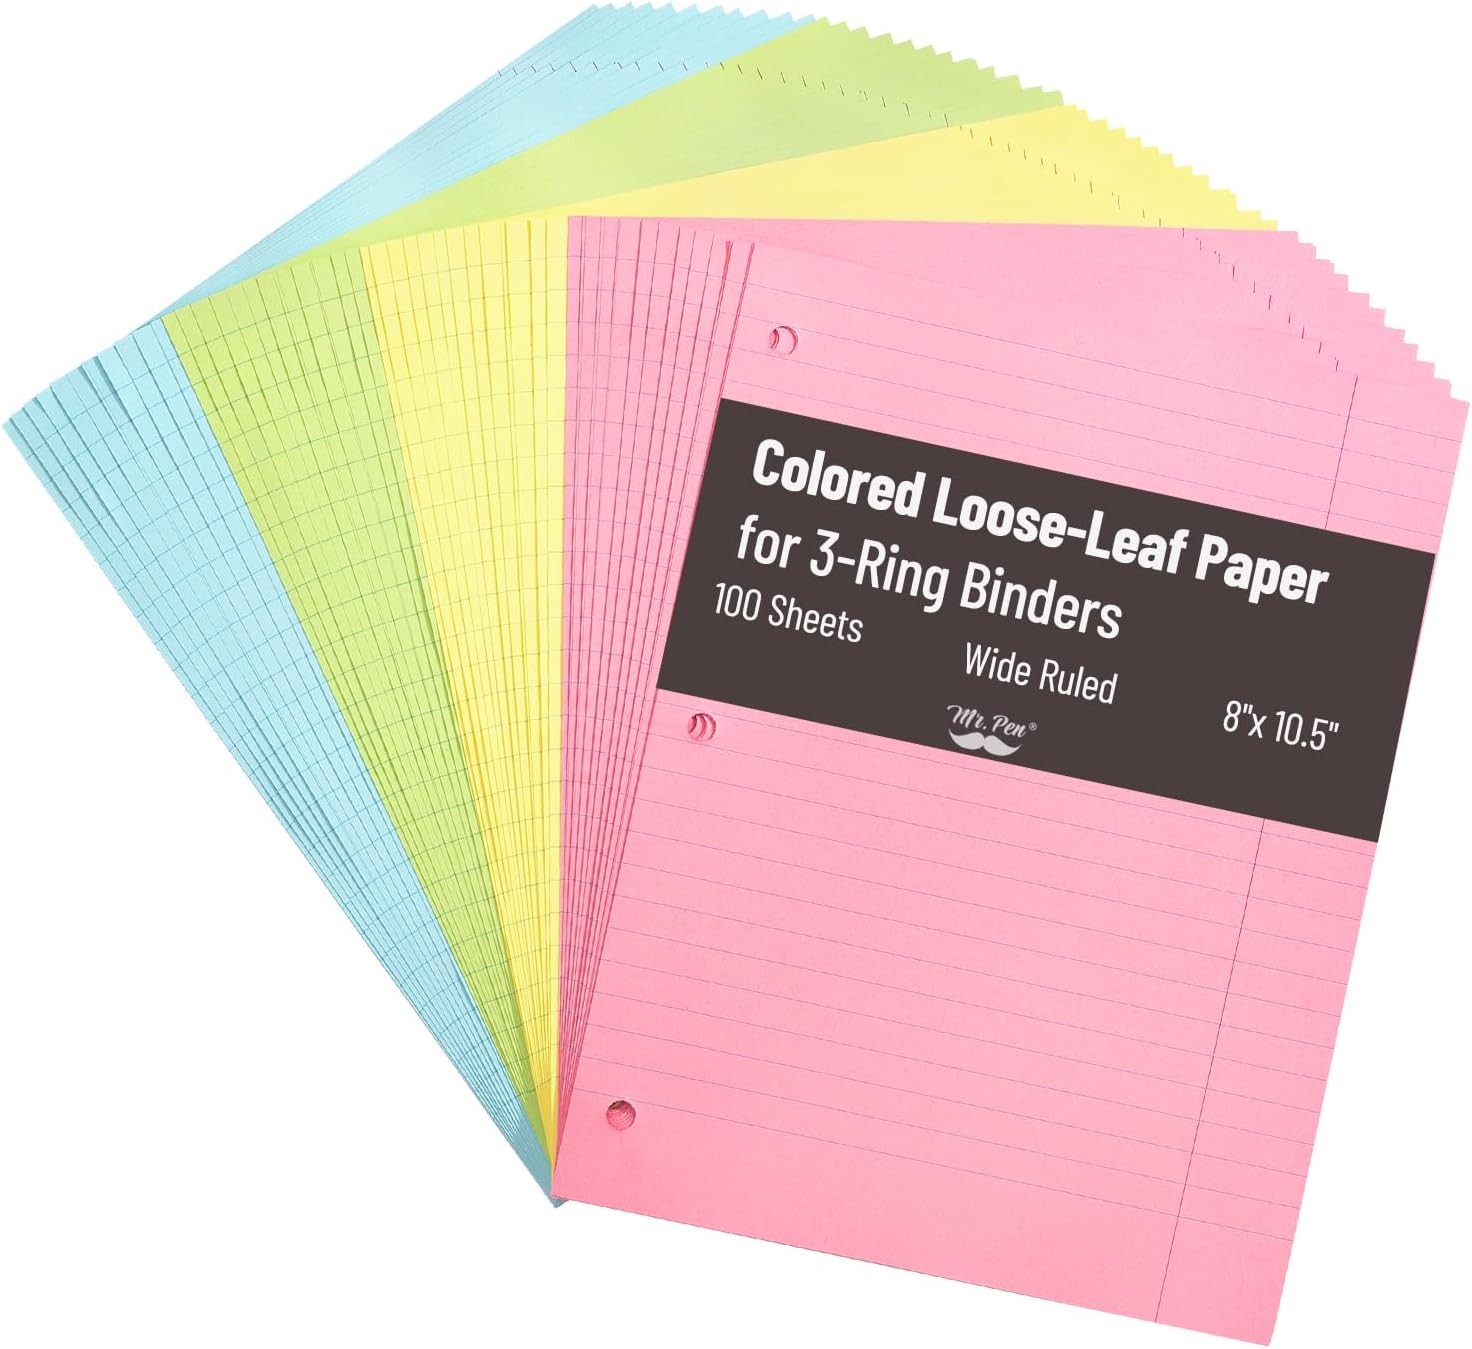 Colored Loose Leaf Paper Wide Ruled, 100 Sheets, 8” x 10.5”, 3- Hole Punched, Notebook Paper, Lined Paper, Binder Paper, Writing Paper, Filler Paper, Wide Ruled Notebook Paper